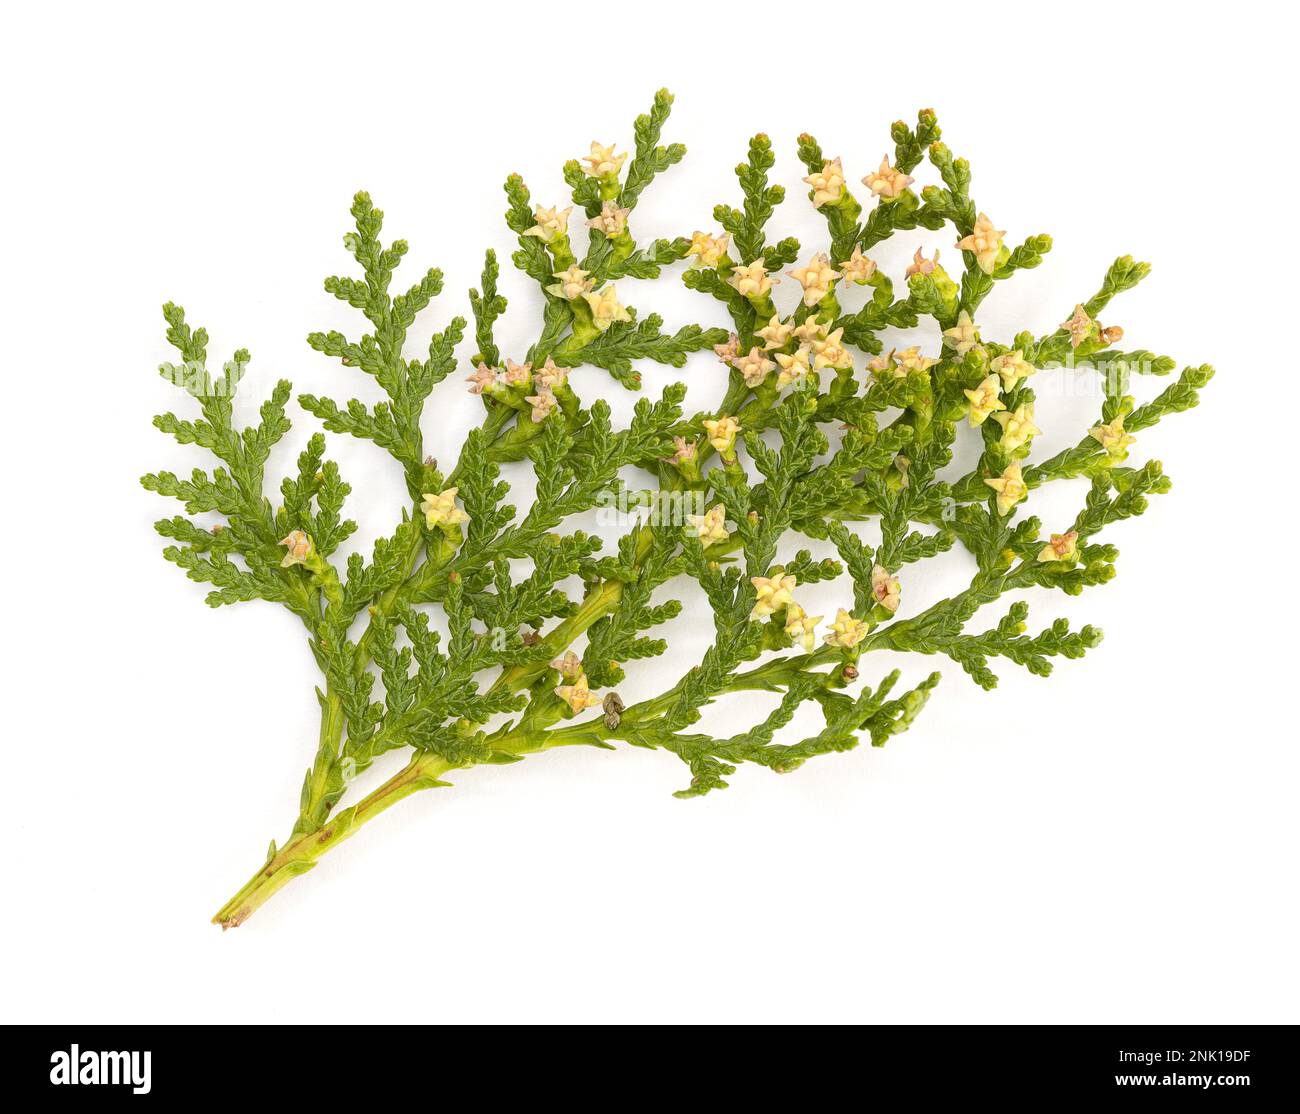 Platycladus or Chinese thuja fir twig with cones isolated on white background. Platycladus orientalis Stock Photo